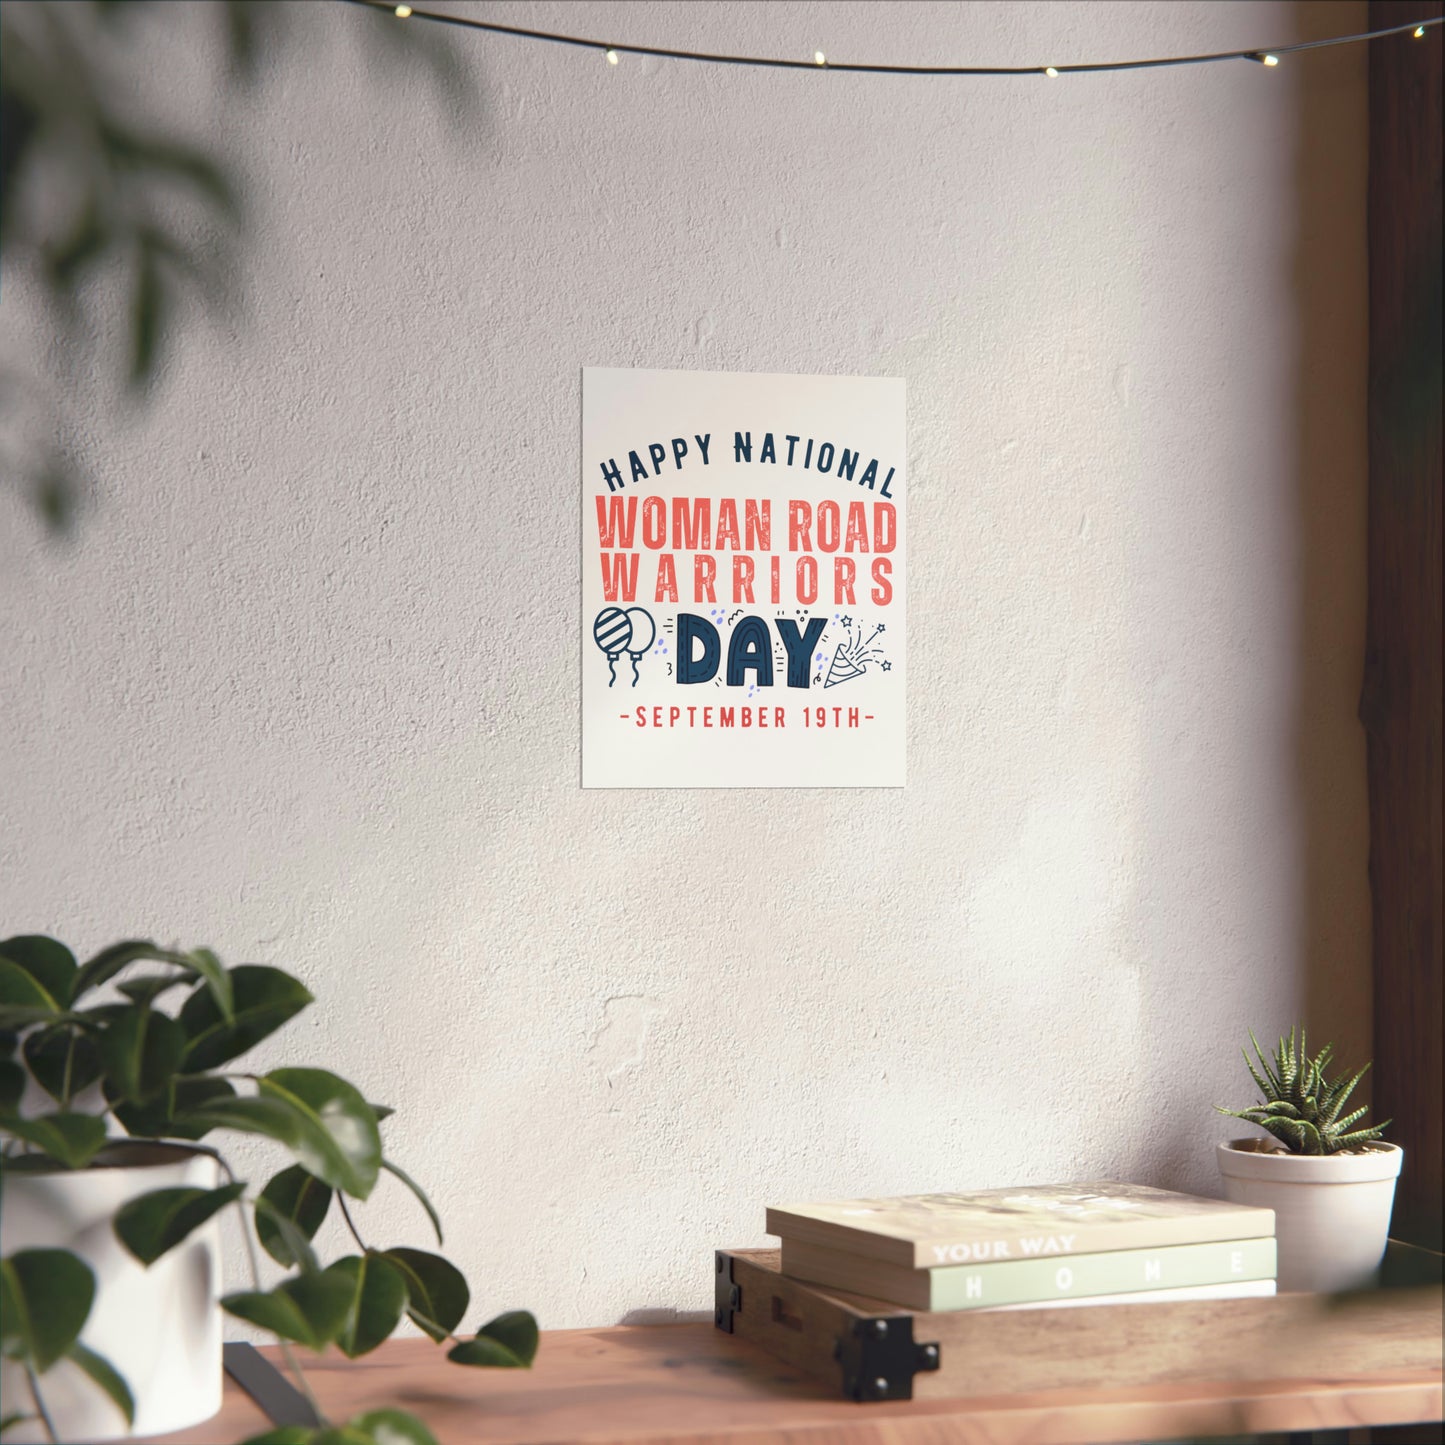 Happy National Woman Road Warriors Day September 19th Occupation Premium Matte Poster